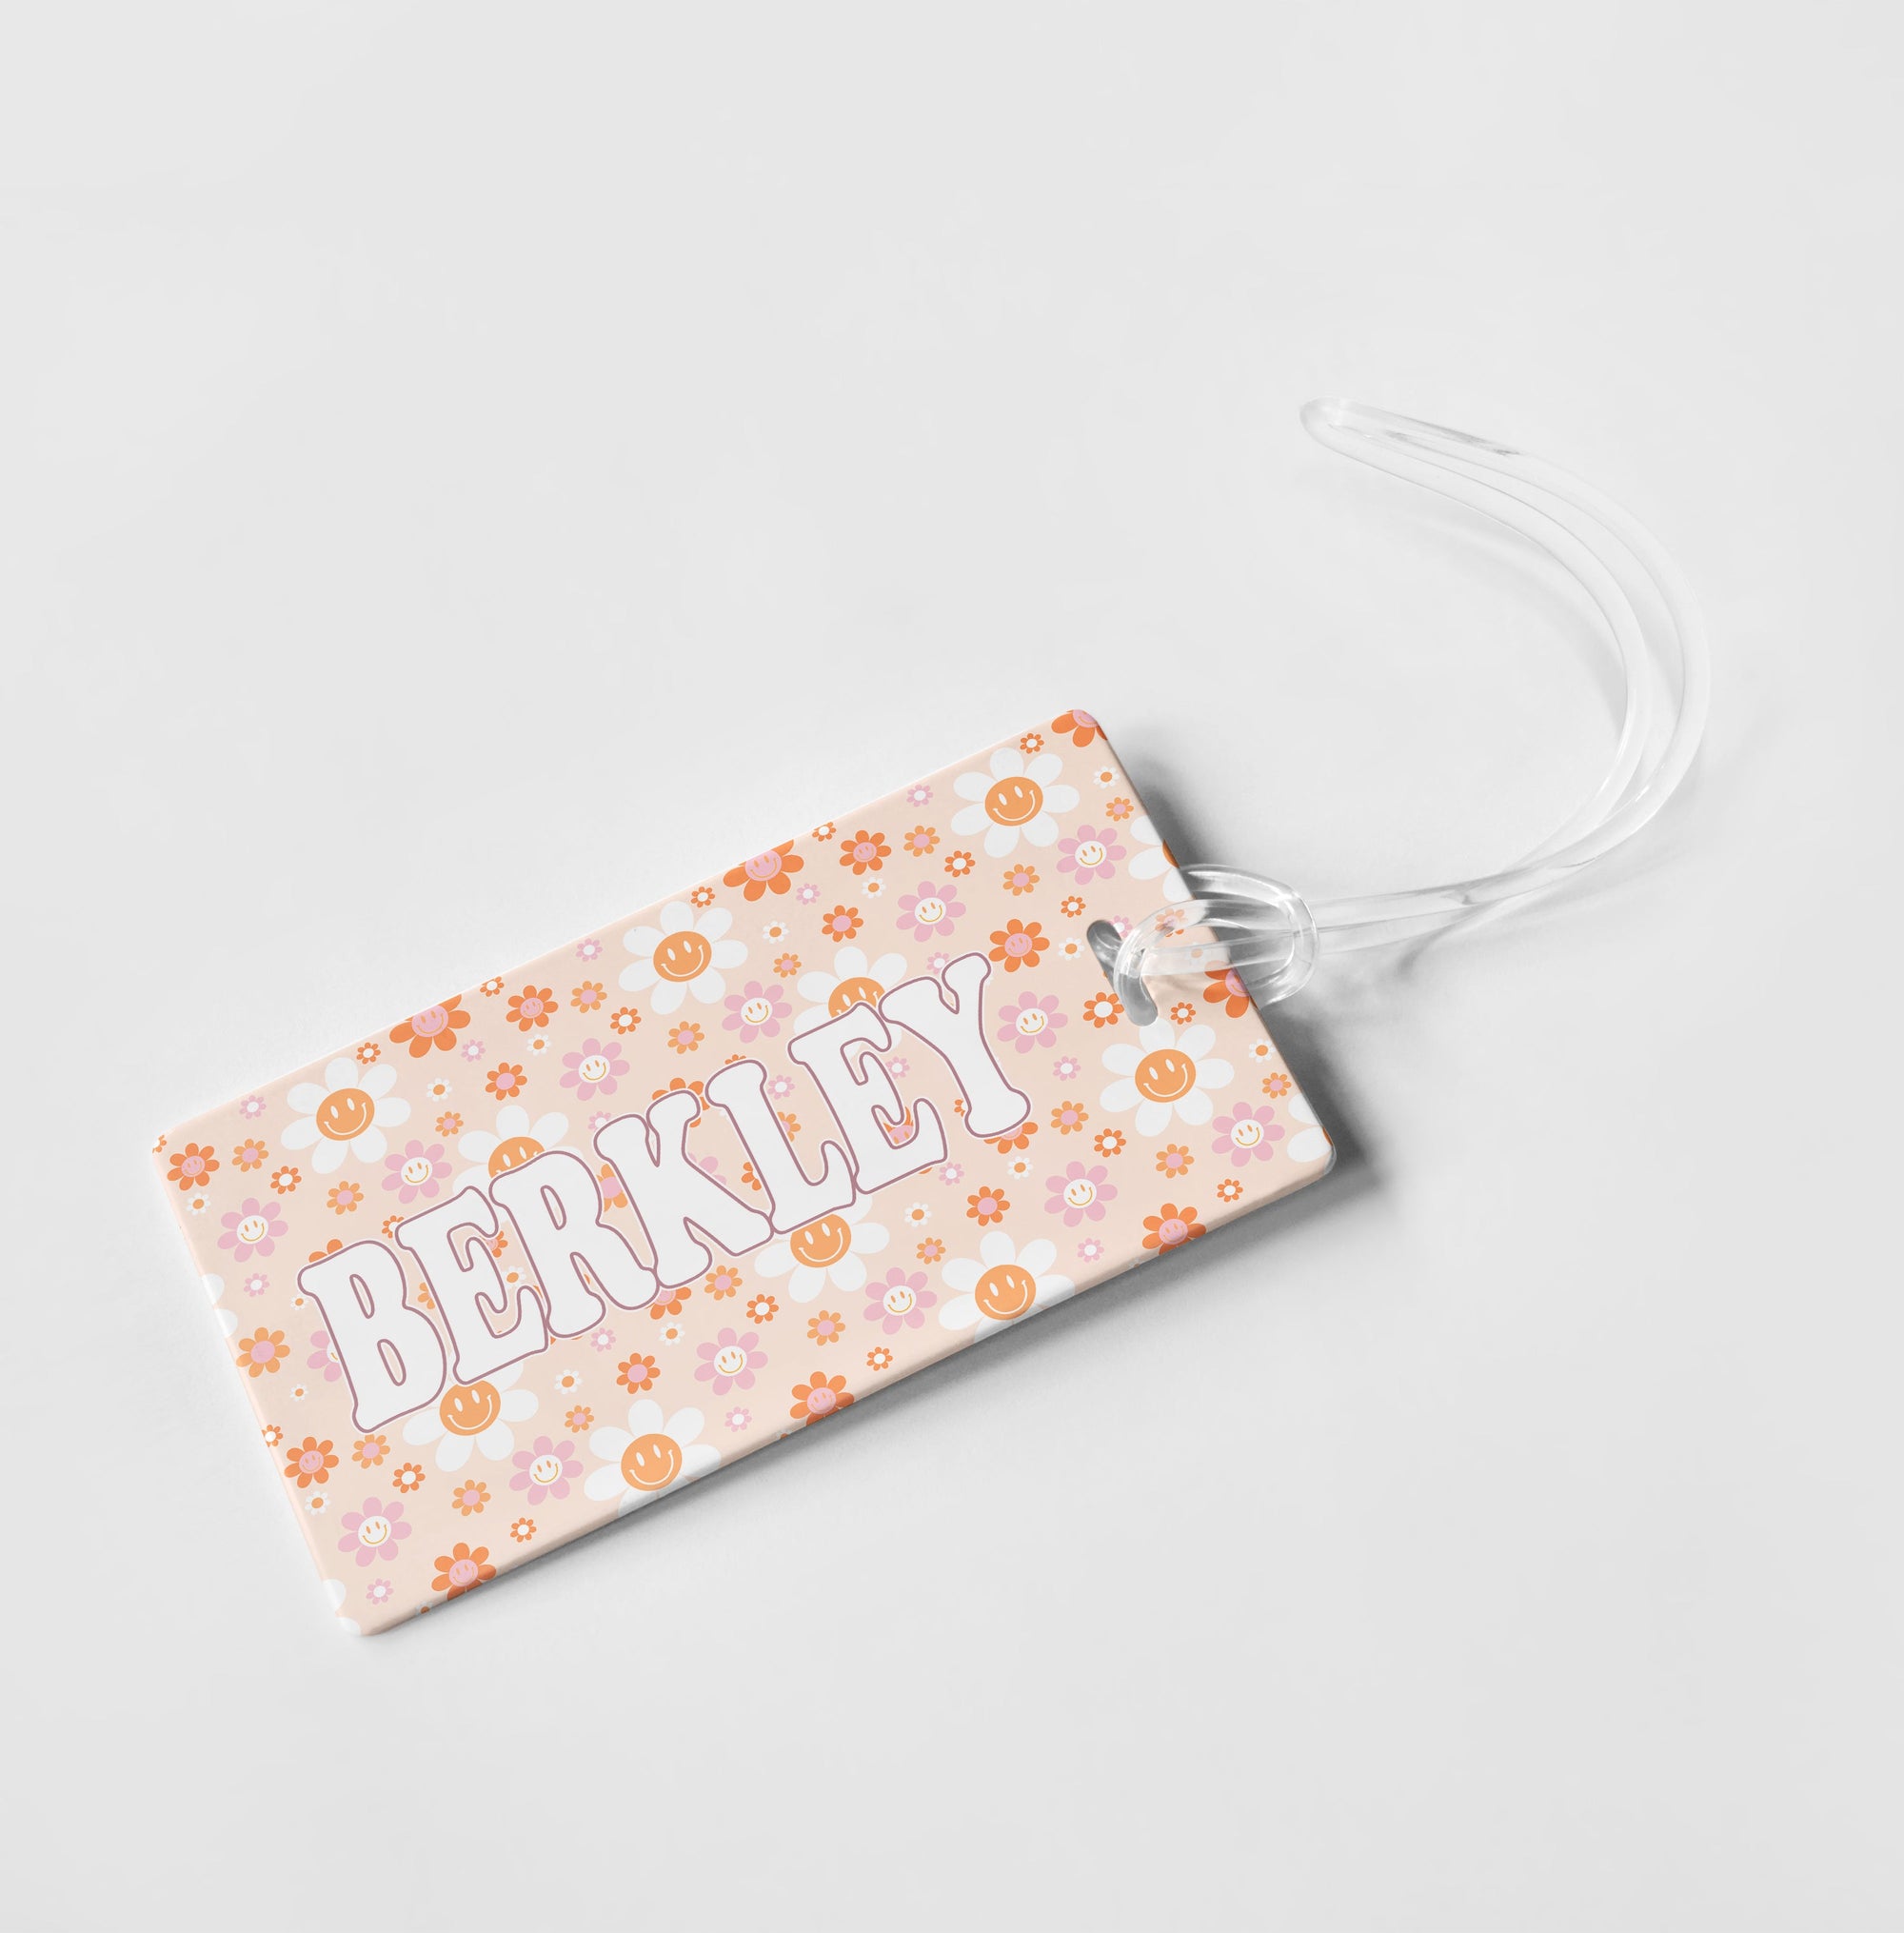 HAPPY DAISY PERSONALIZED BAG / LUGGAGE TAG